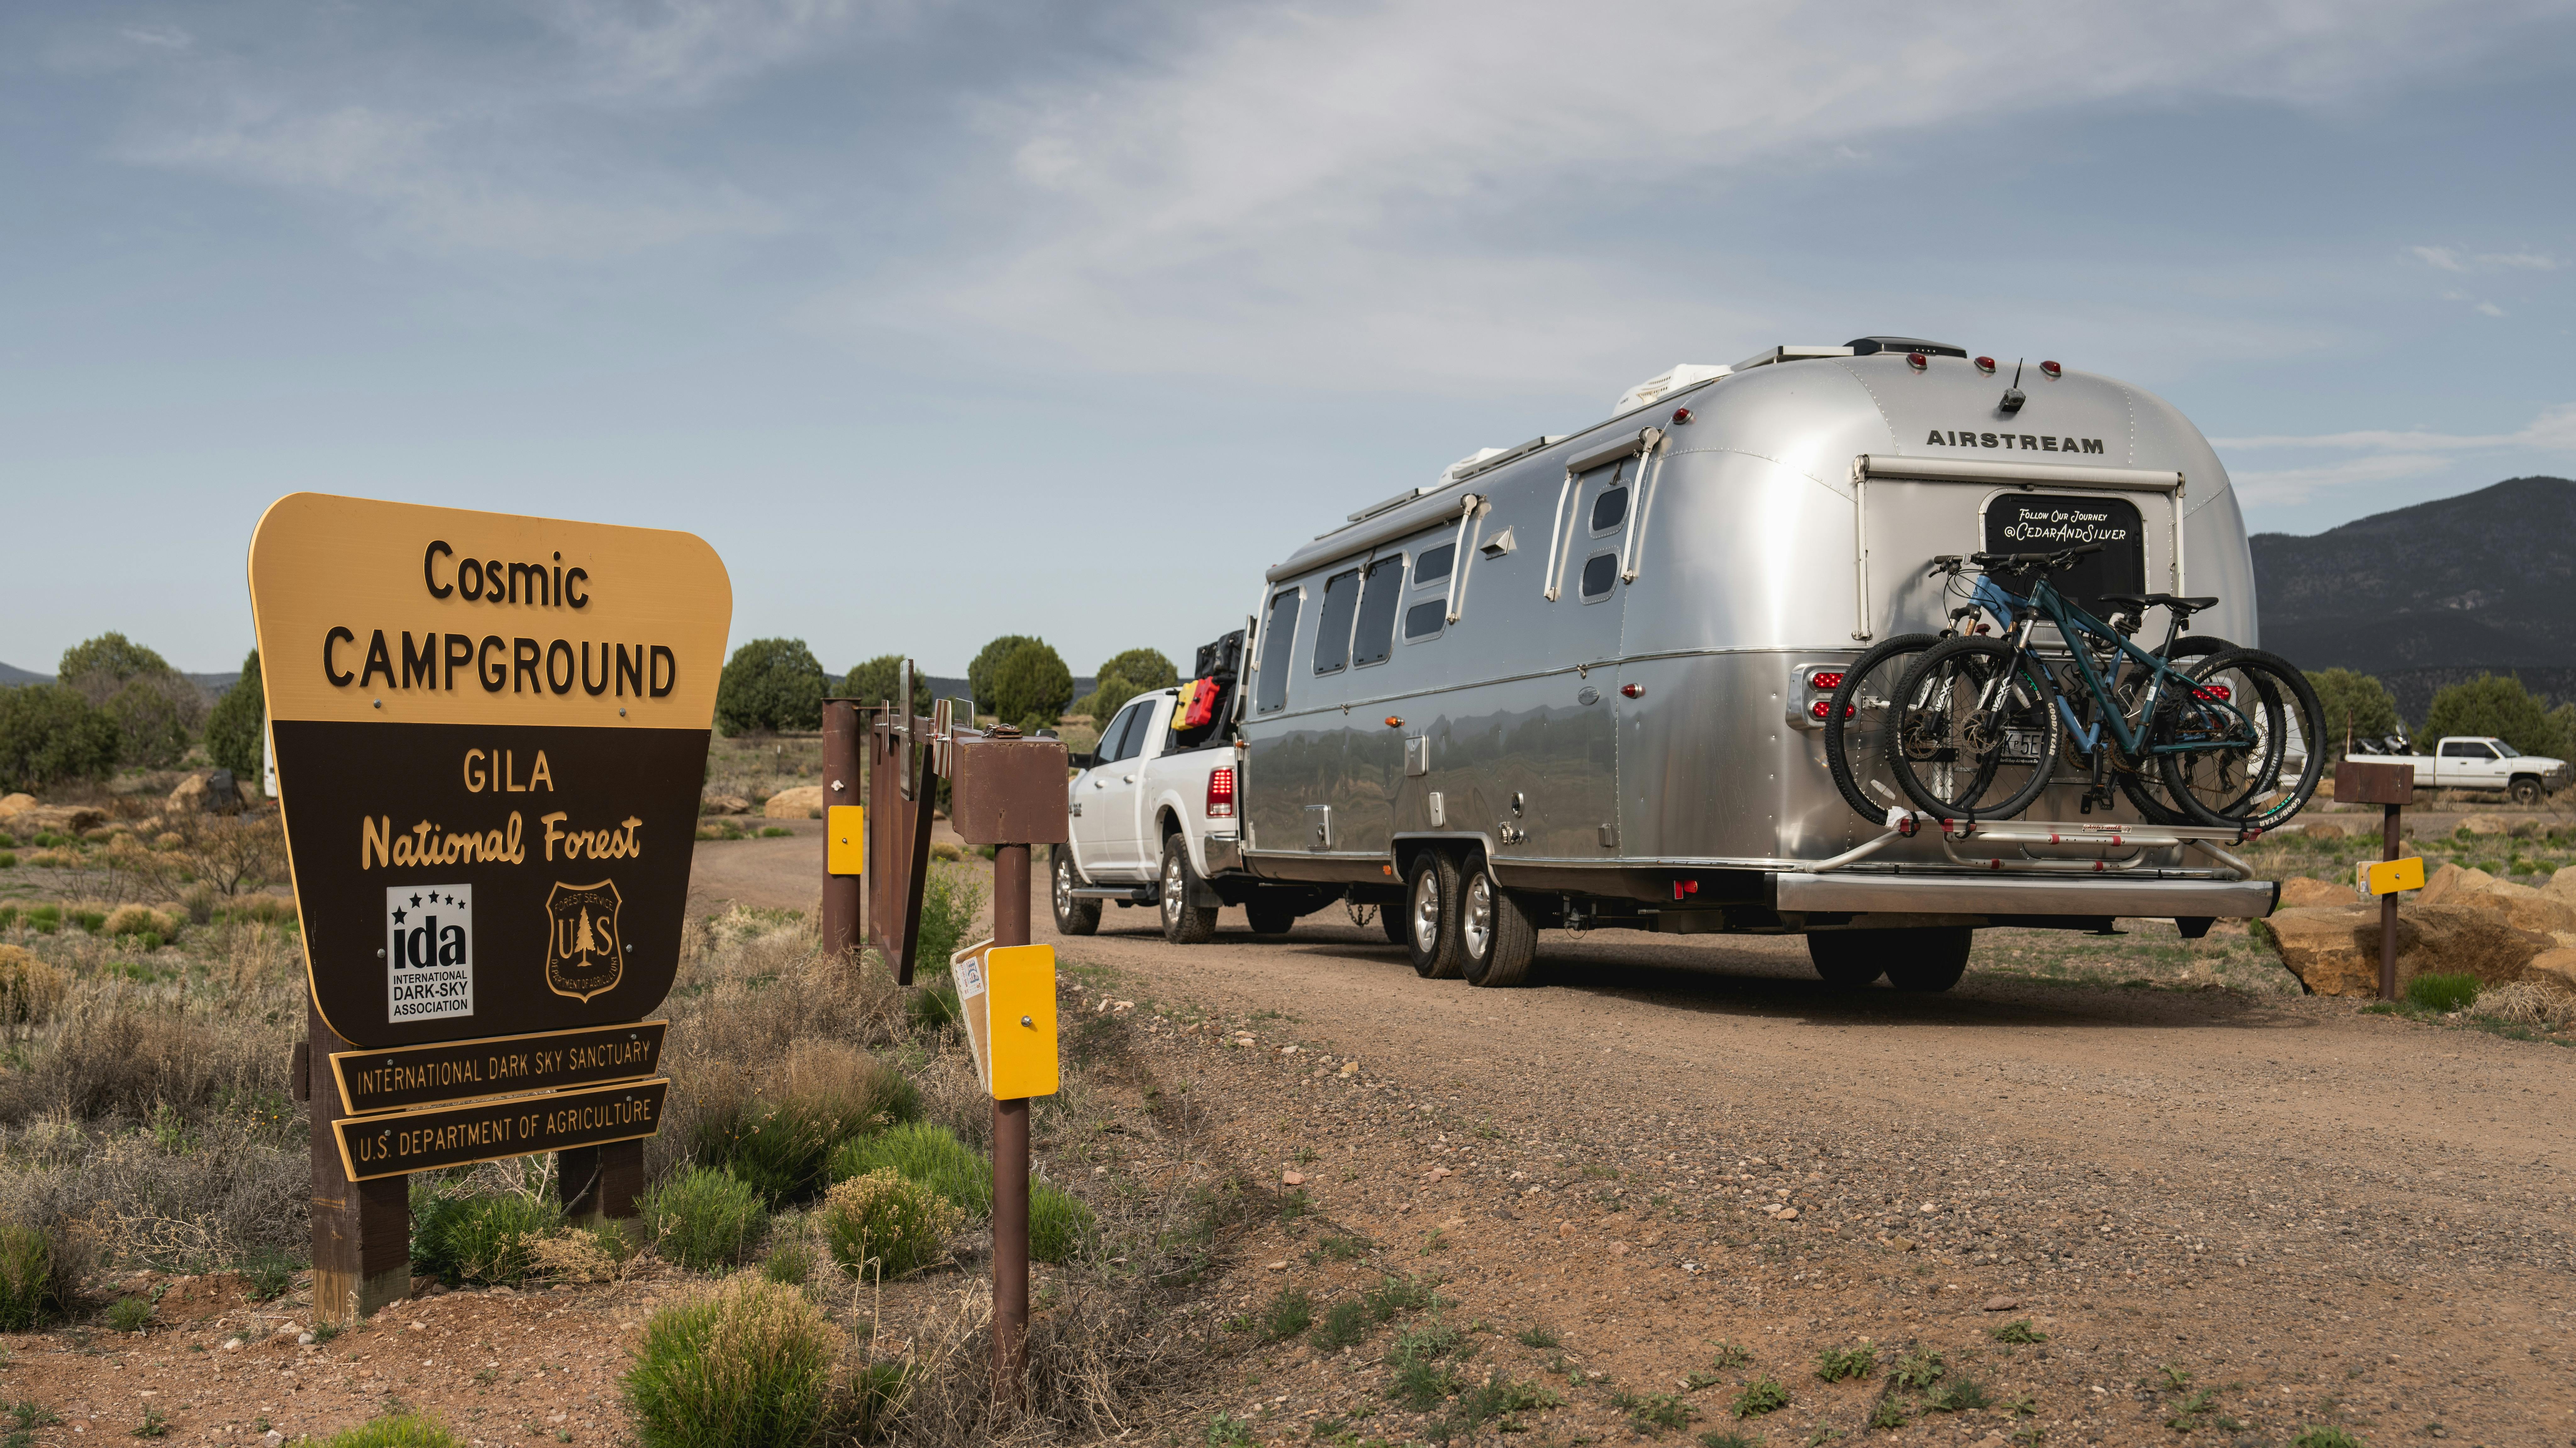 The Gila National Forest sign and Karen Blue's Airstream Flying Cloud travel trailer.